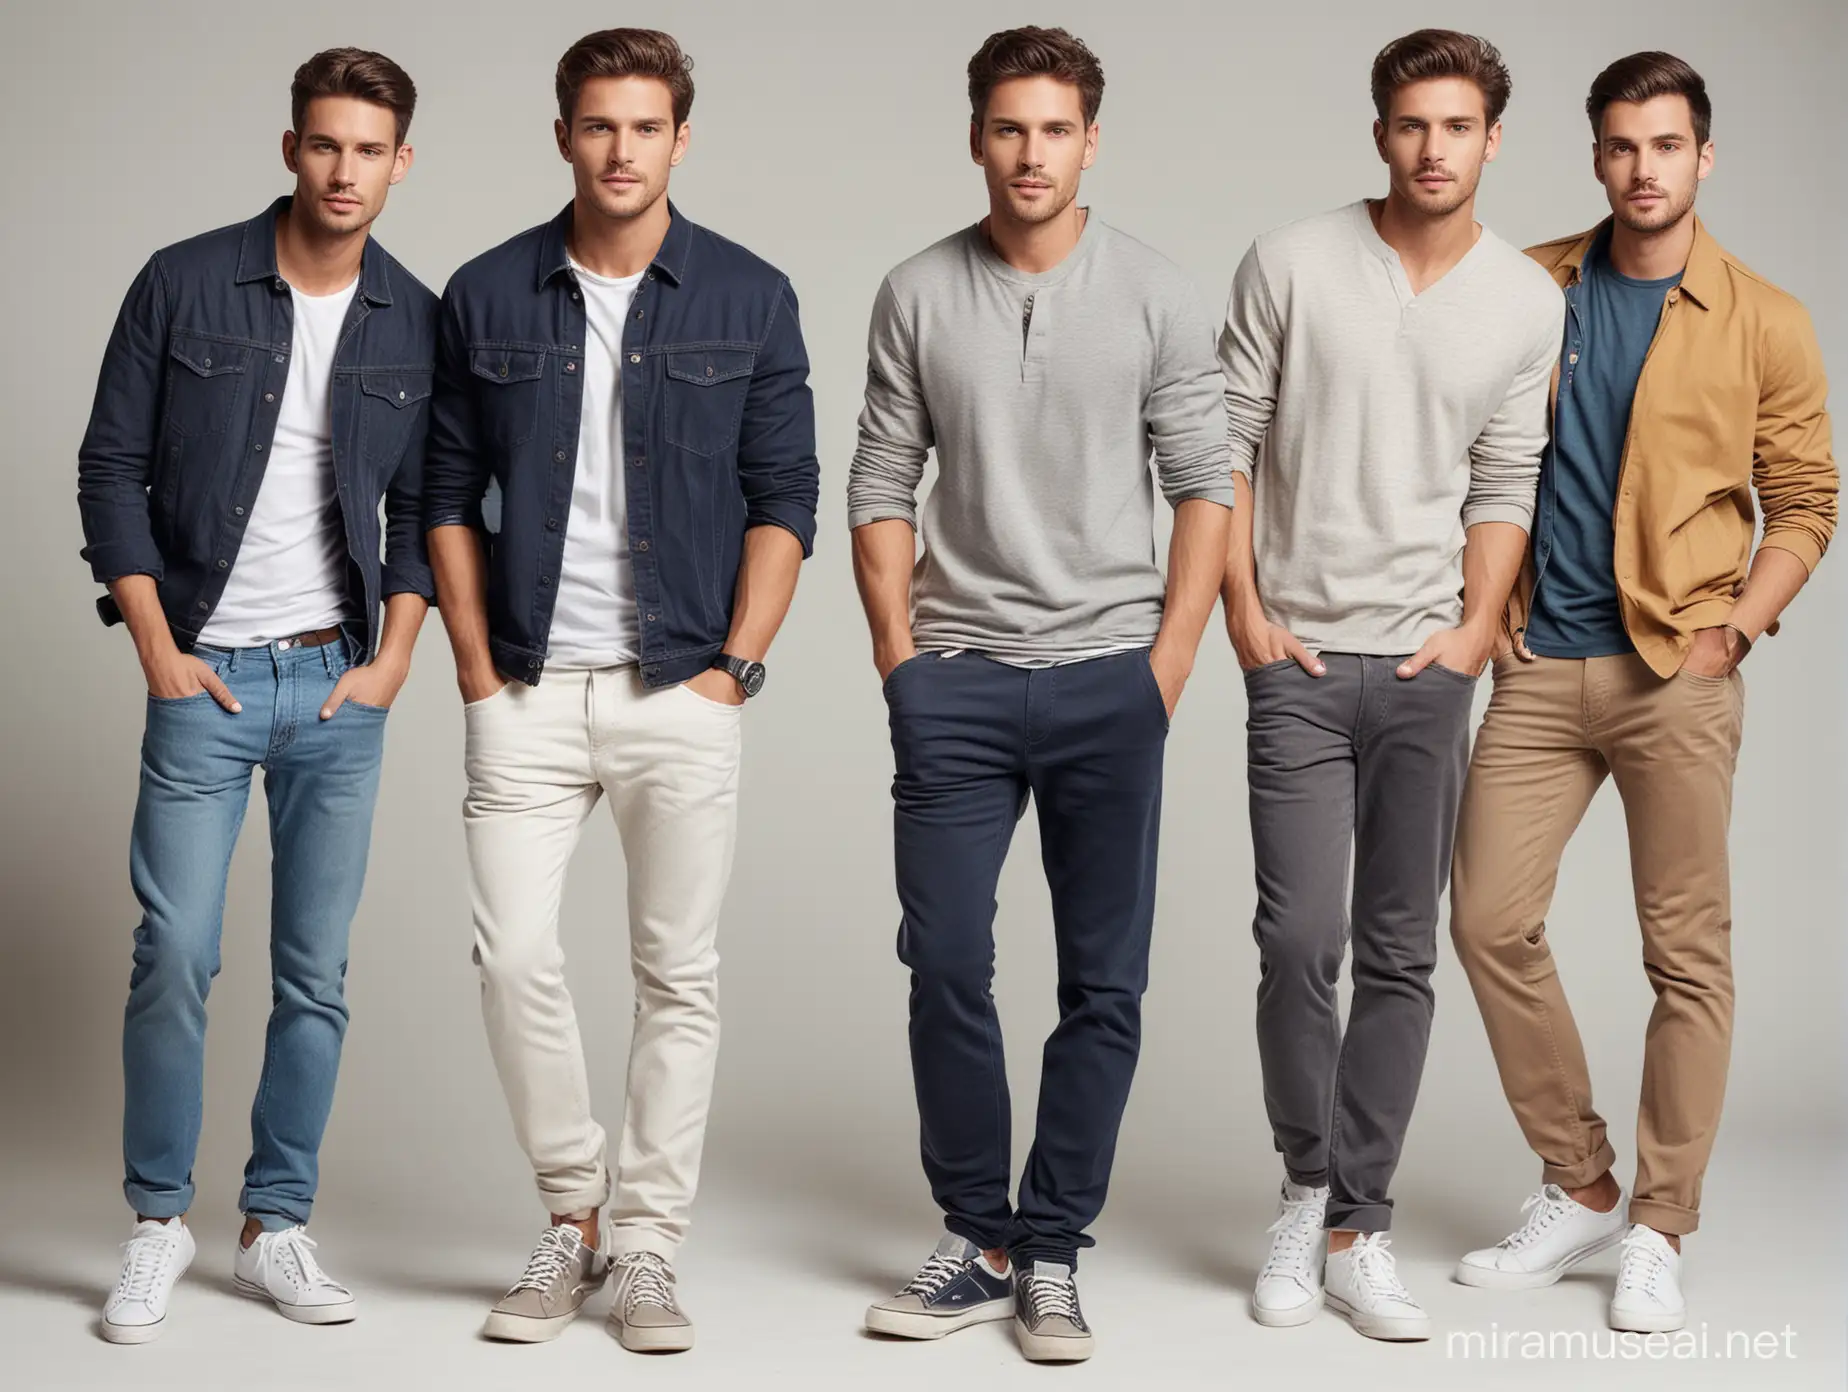 Casual Outfit Ideas for Men Style Inspiration from Four Fashion Models